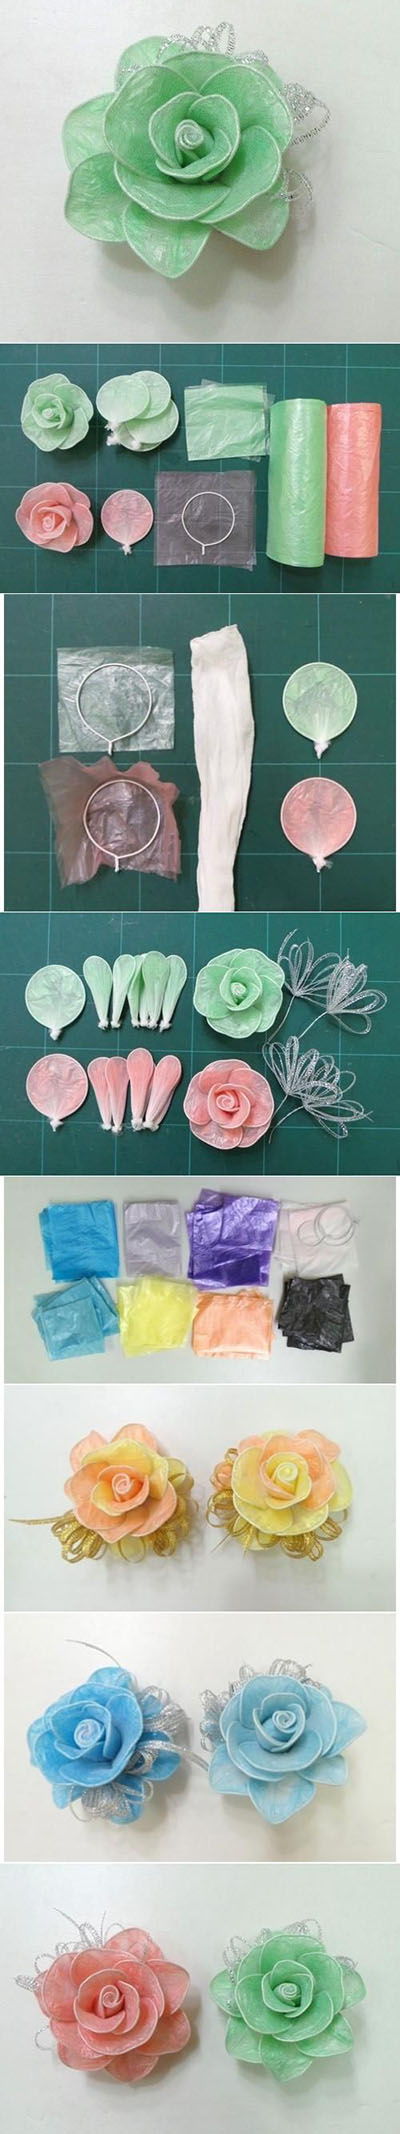 11   DIY Hair Roses Made from Colored plastic and Twist Ties a6331a6e